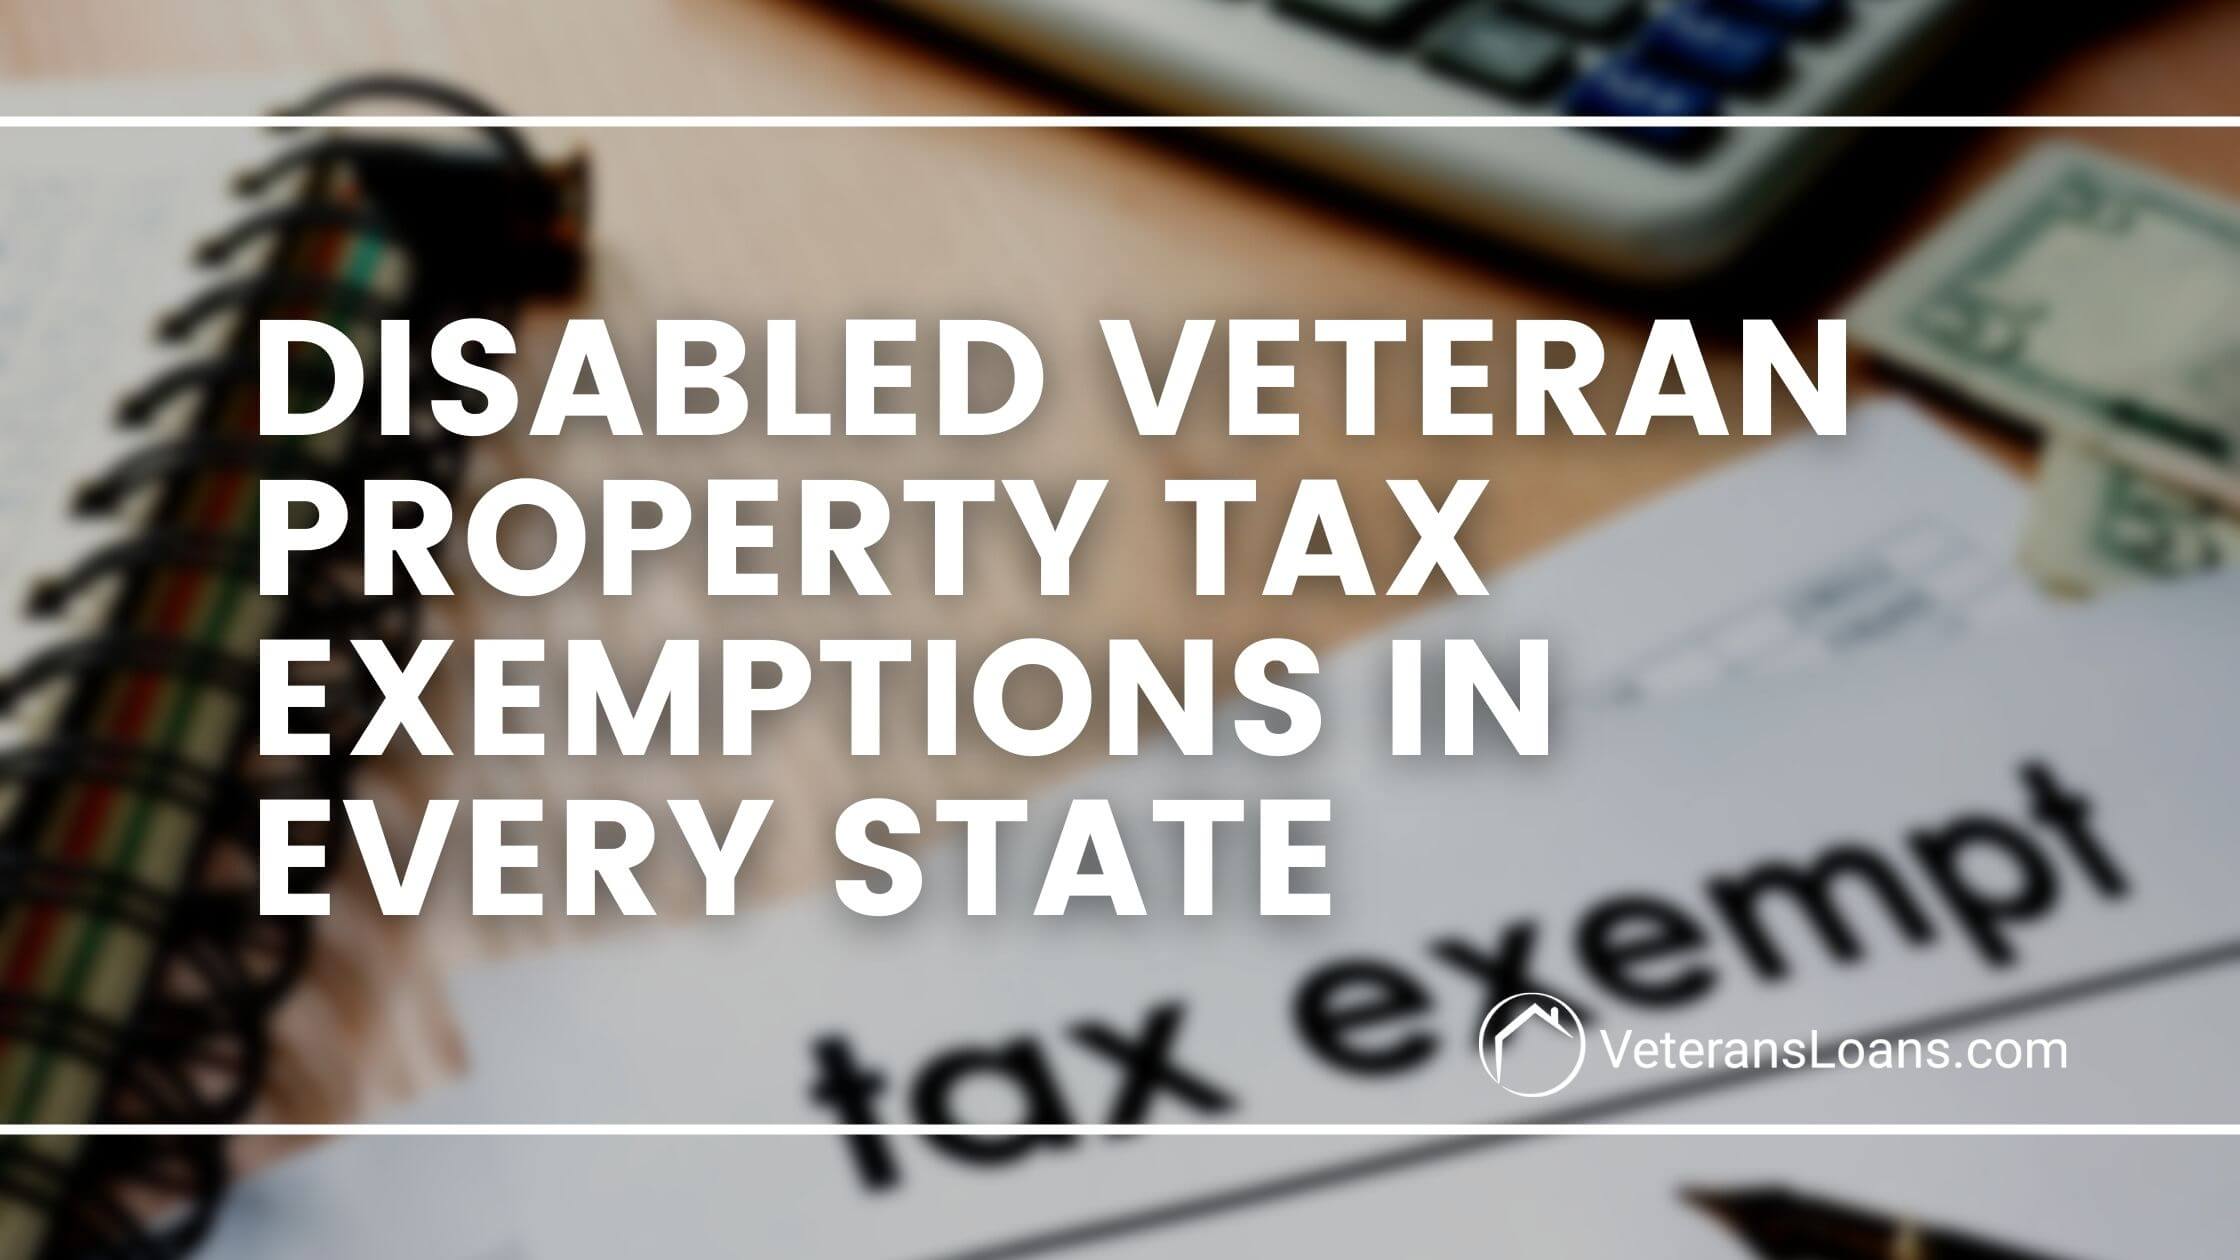 State Of Illinois Disabled Veterans Property Tax Exemption